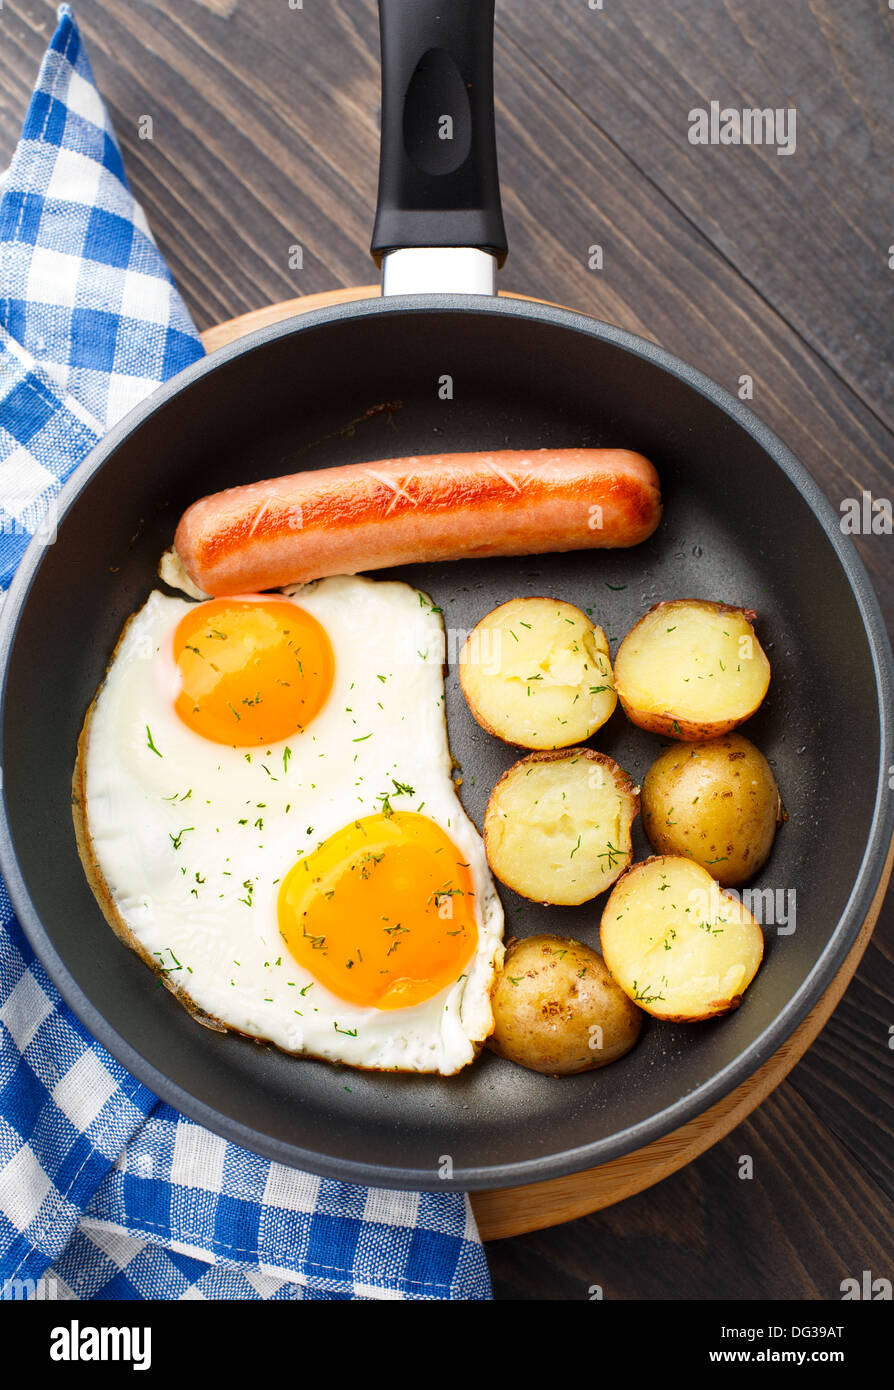 Breakfast with eggs, sausage and potato Stock Photo